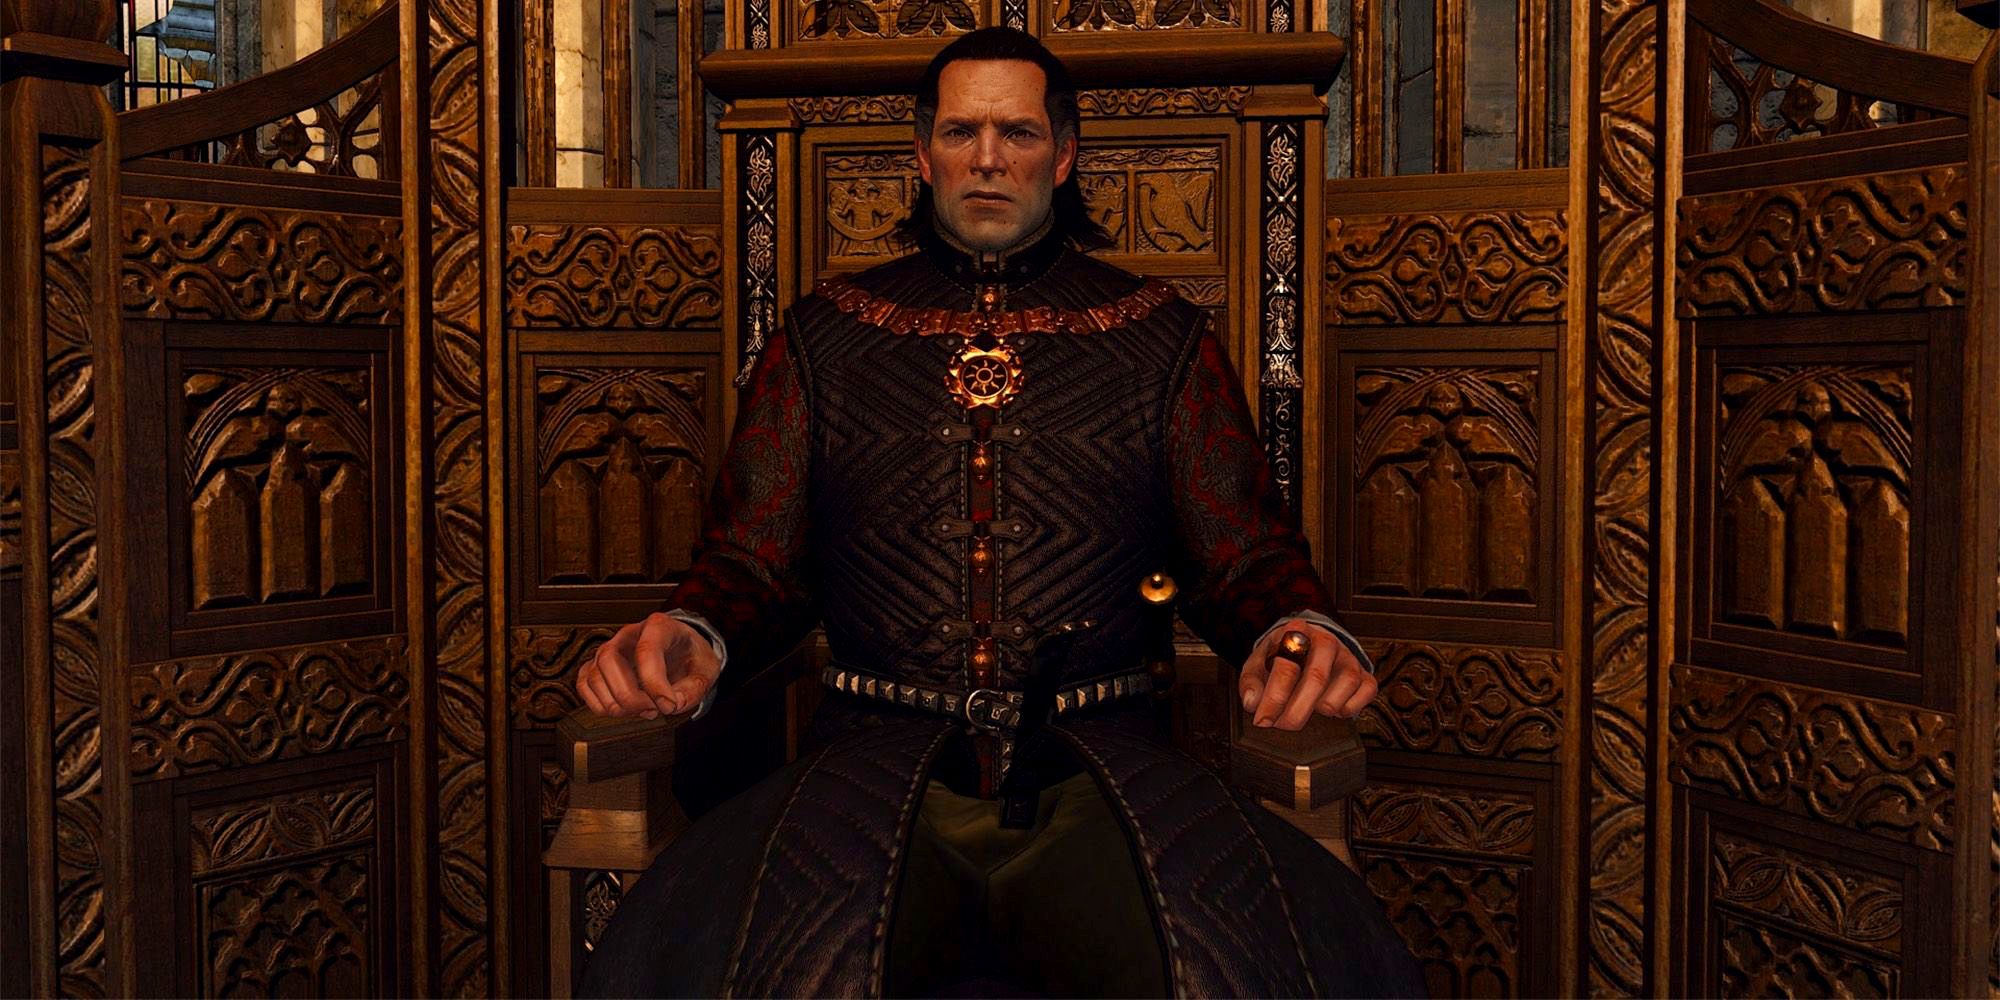 Character ending for The Witcher 3's Emperor Emhyr var Emreis